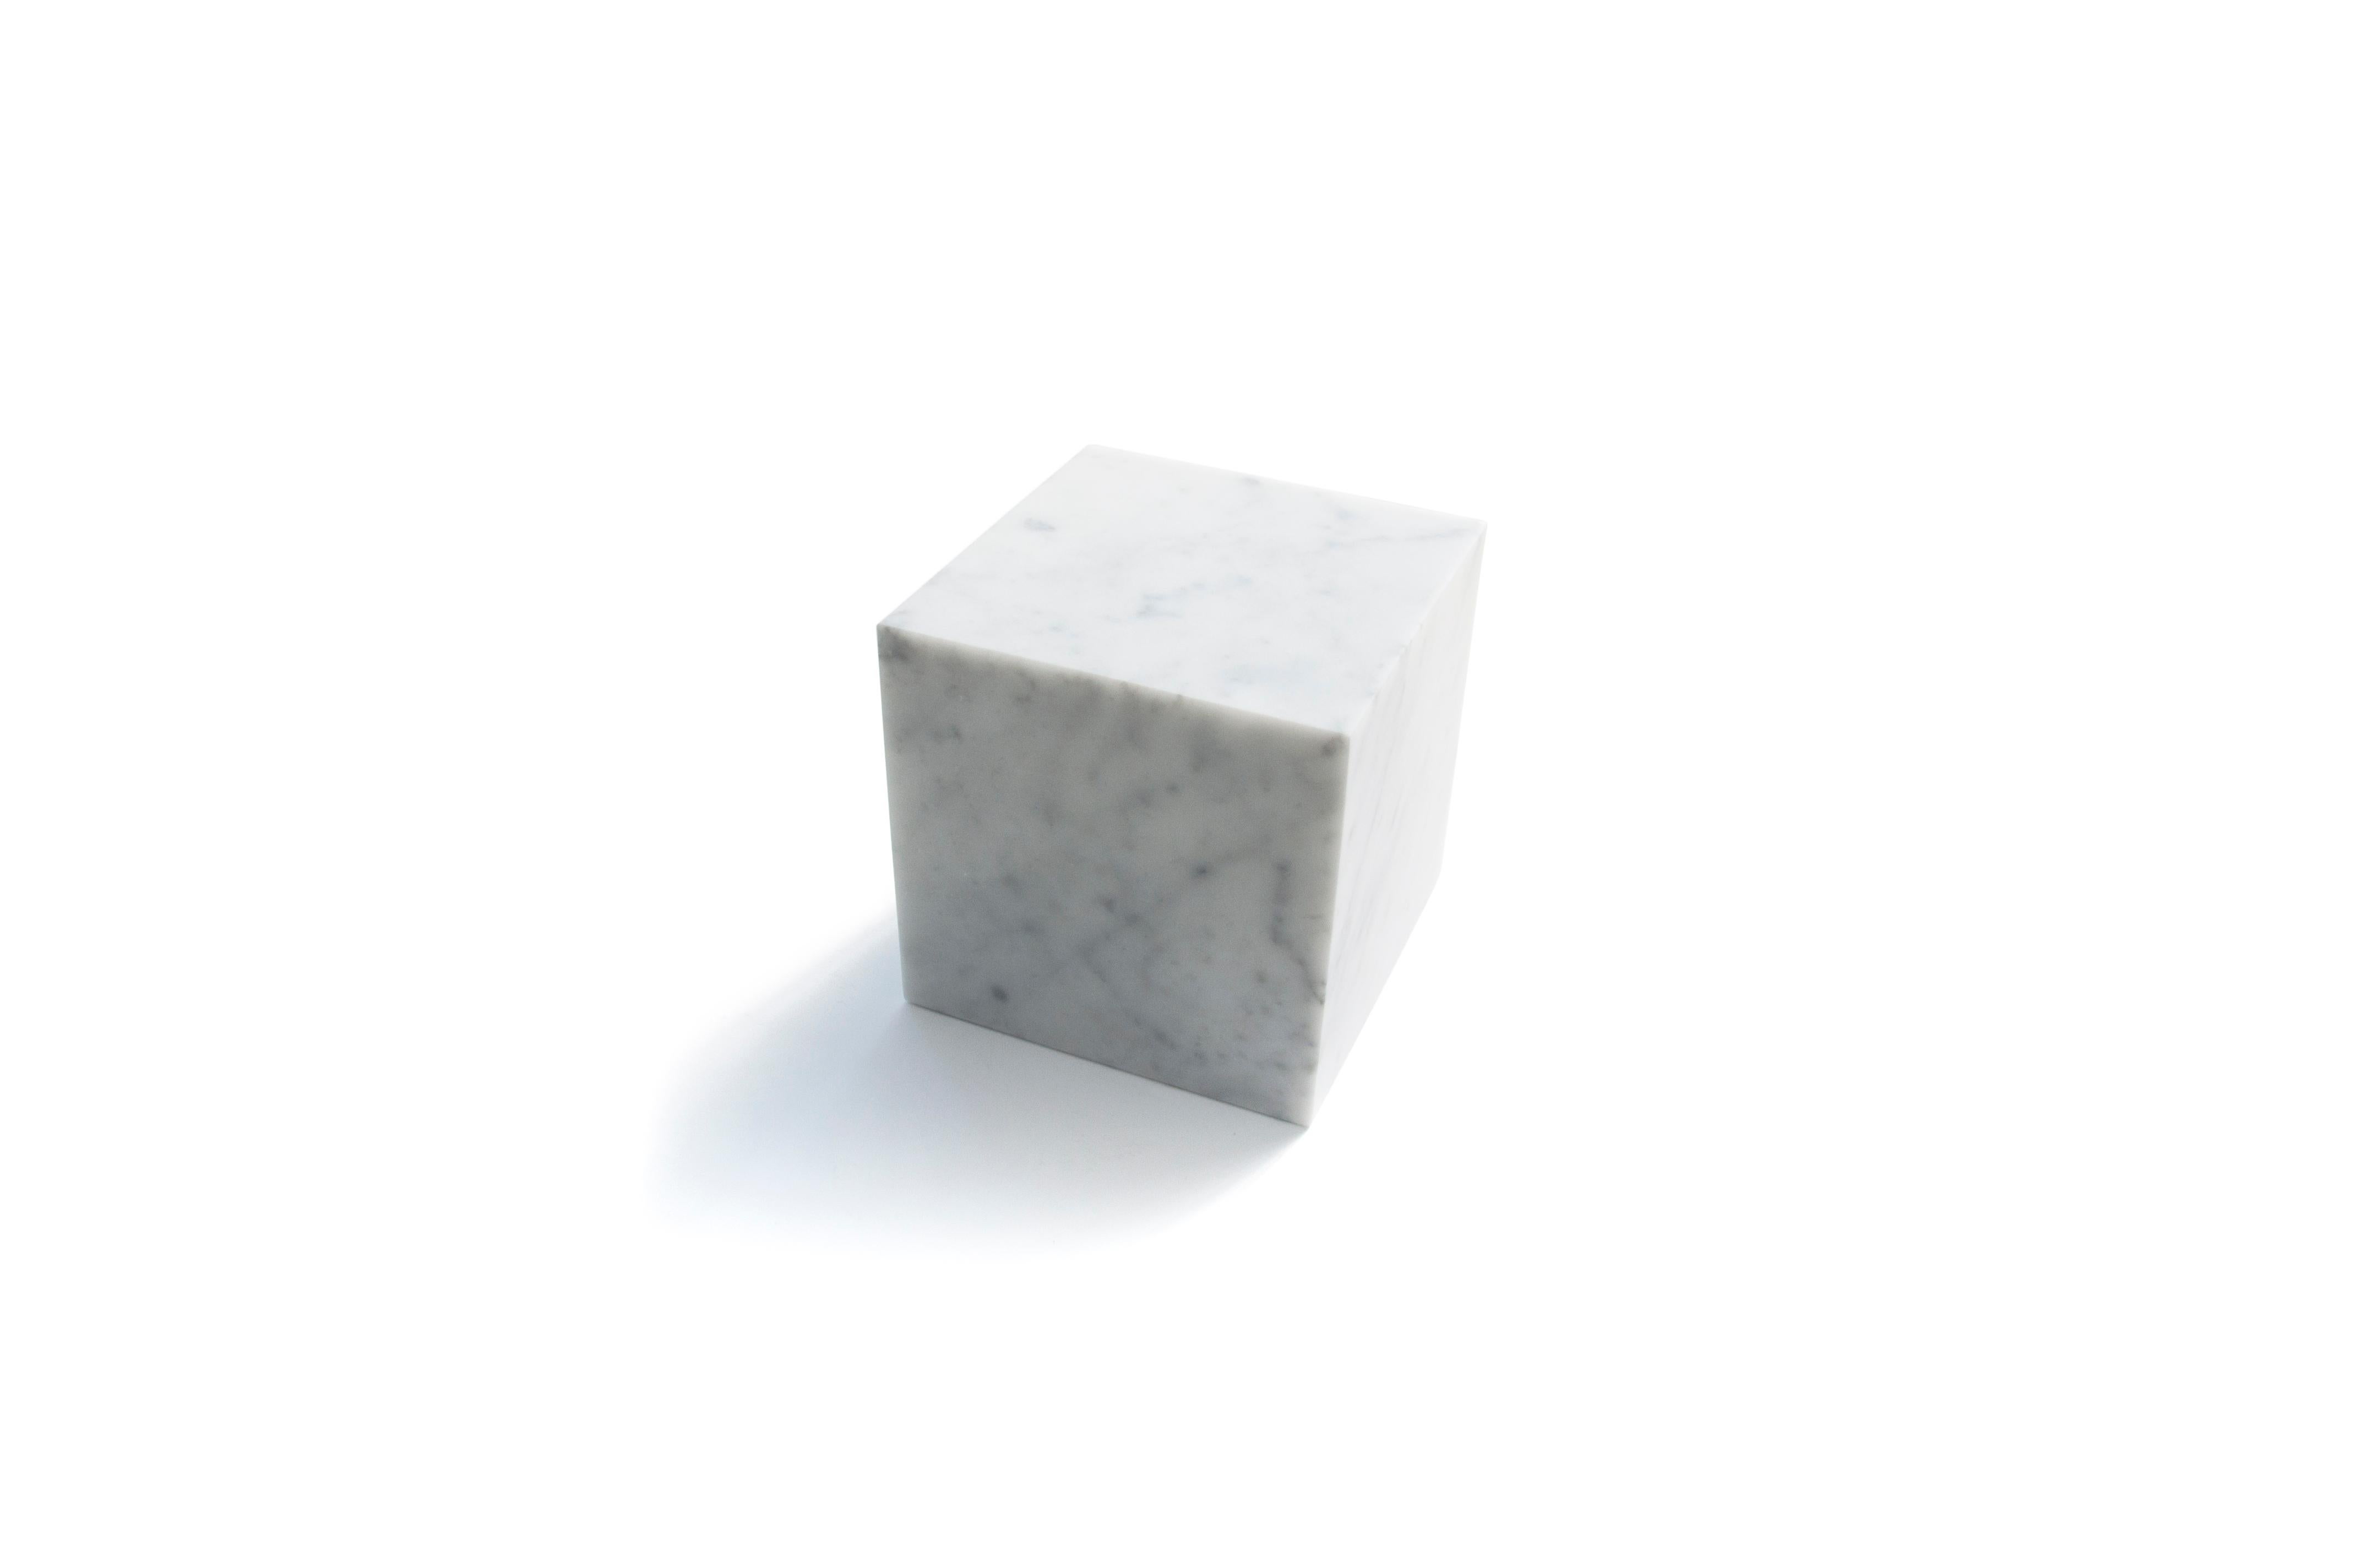 Big decorative paperweight cube full in satin white Carrara marble. Each piece is in a way unique (every marble block is different in veins and shades) and handmade by Italian artisans specialized over generations in processing marble. Slight